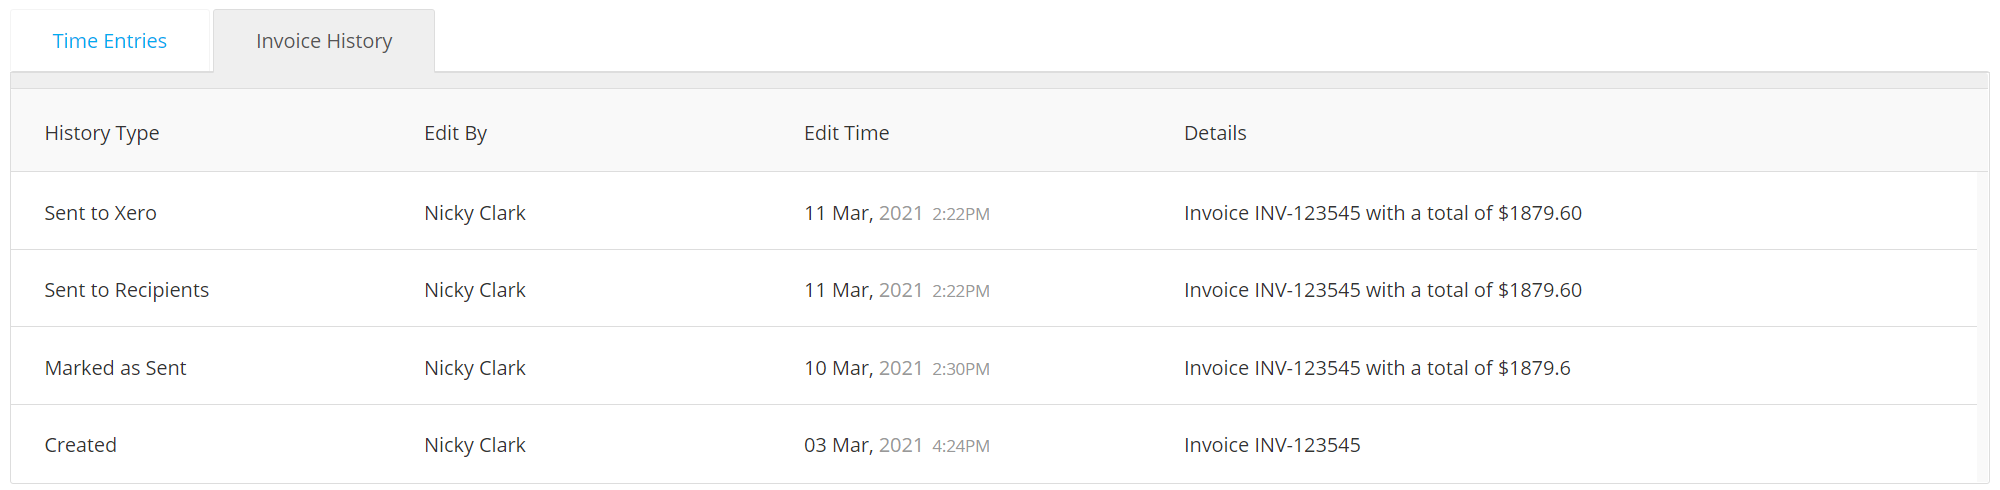 Invoice_History.png